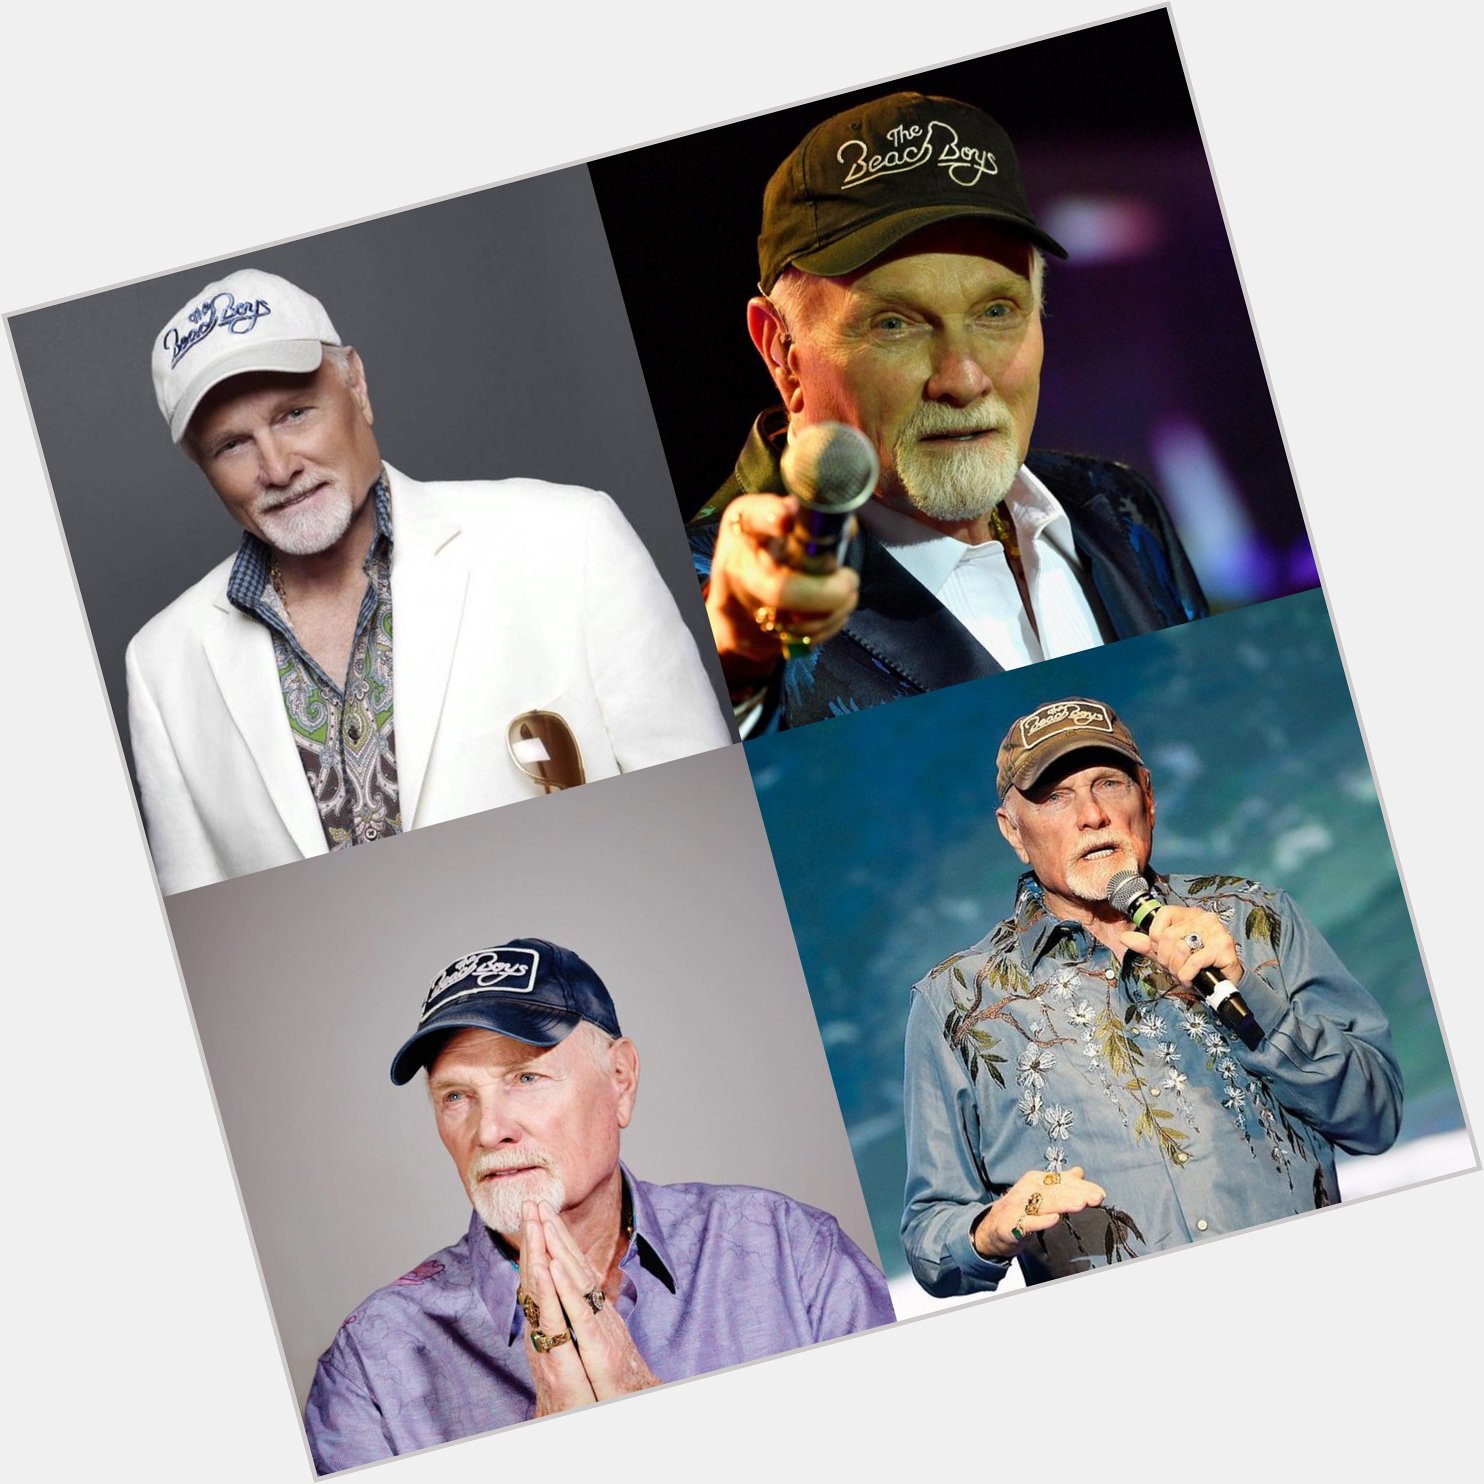 Happy 80 birthday to Mike Love . Hope that he has a wonderful birthday.       